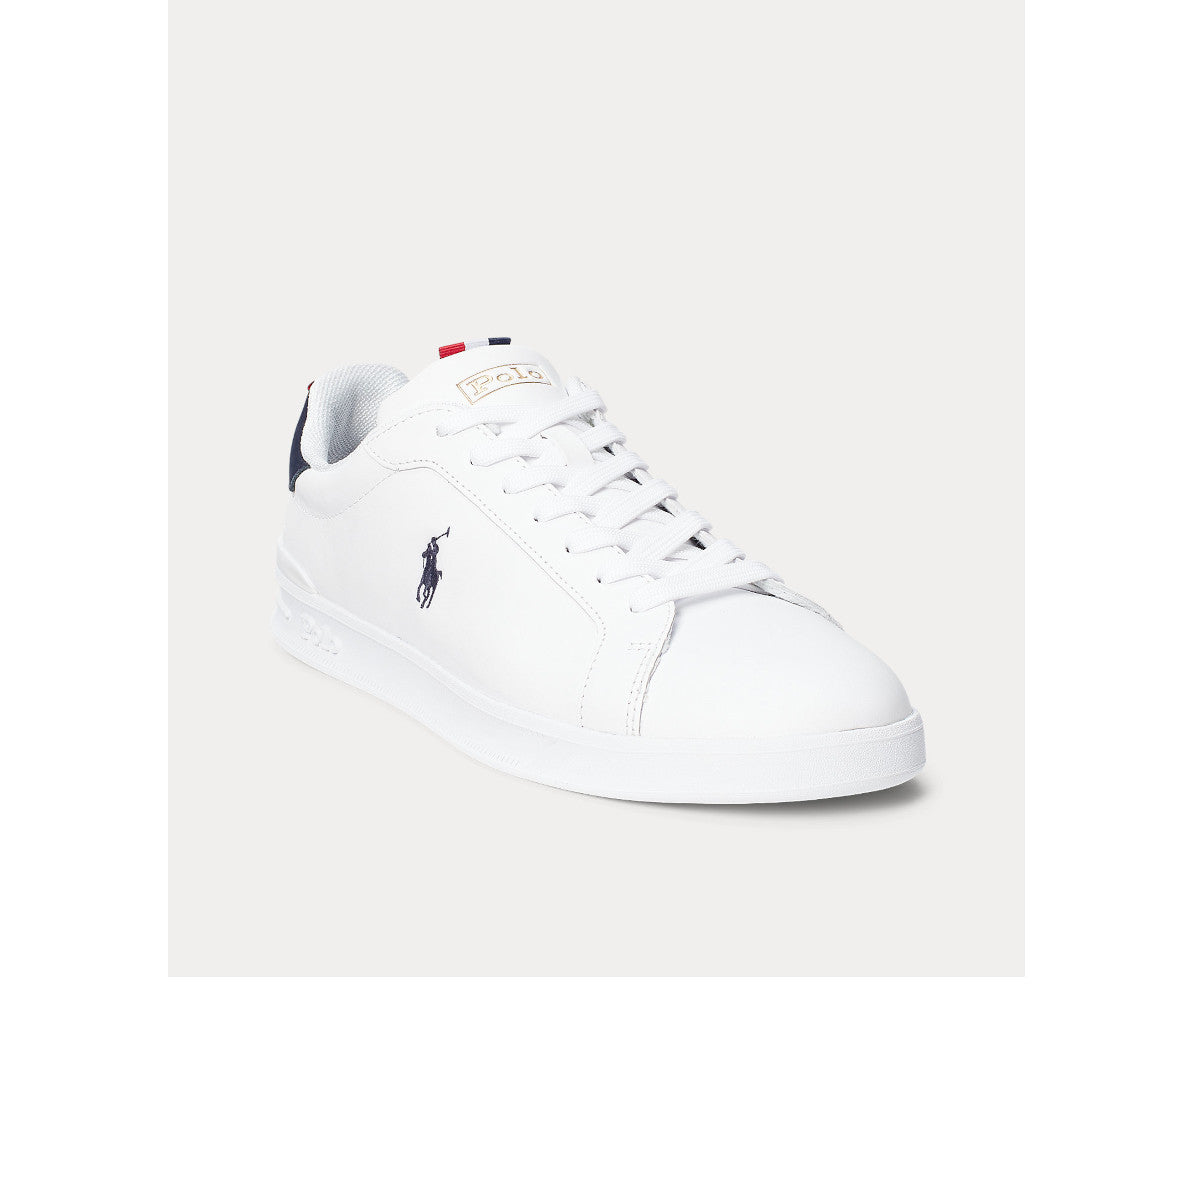 Polo Ralph Lauren HRT CT 11 Sneakers Low Top 003 White/Navy/Red